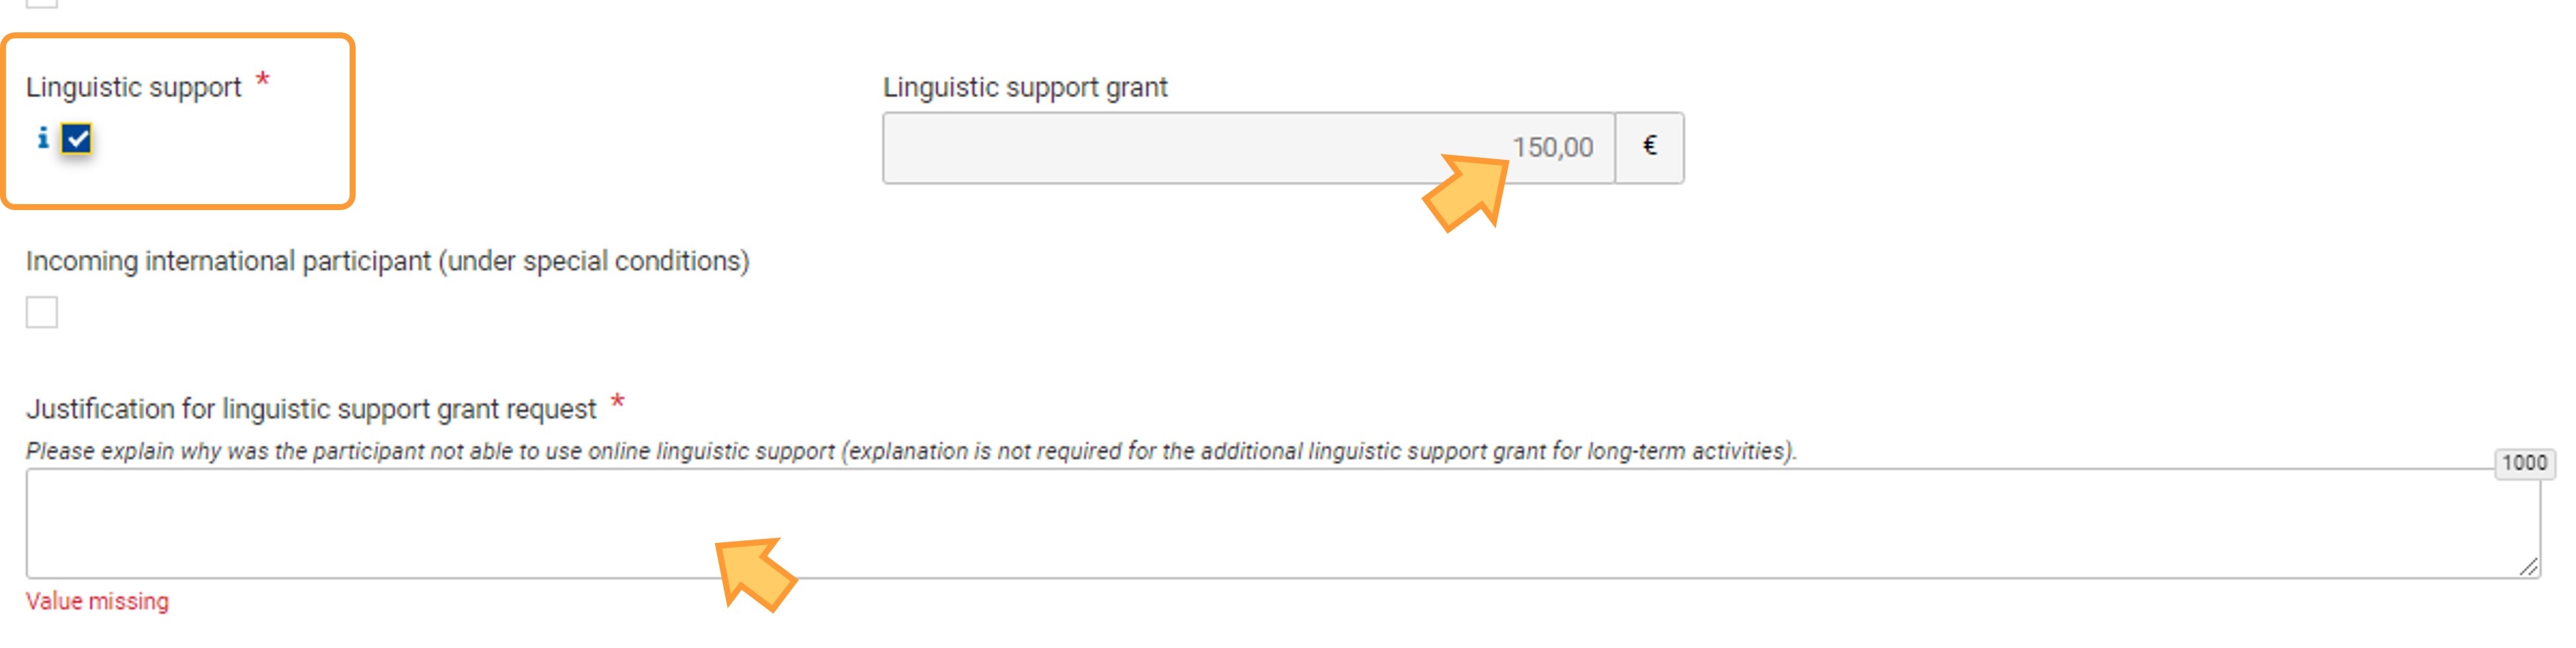 Linguistic support flag and Linguistic support grant